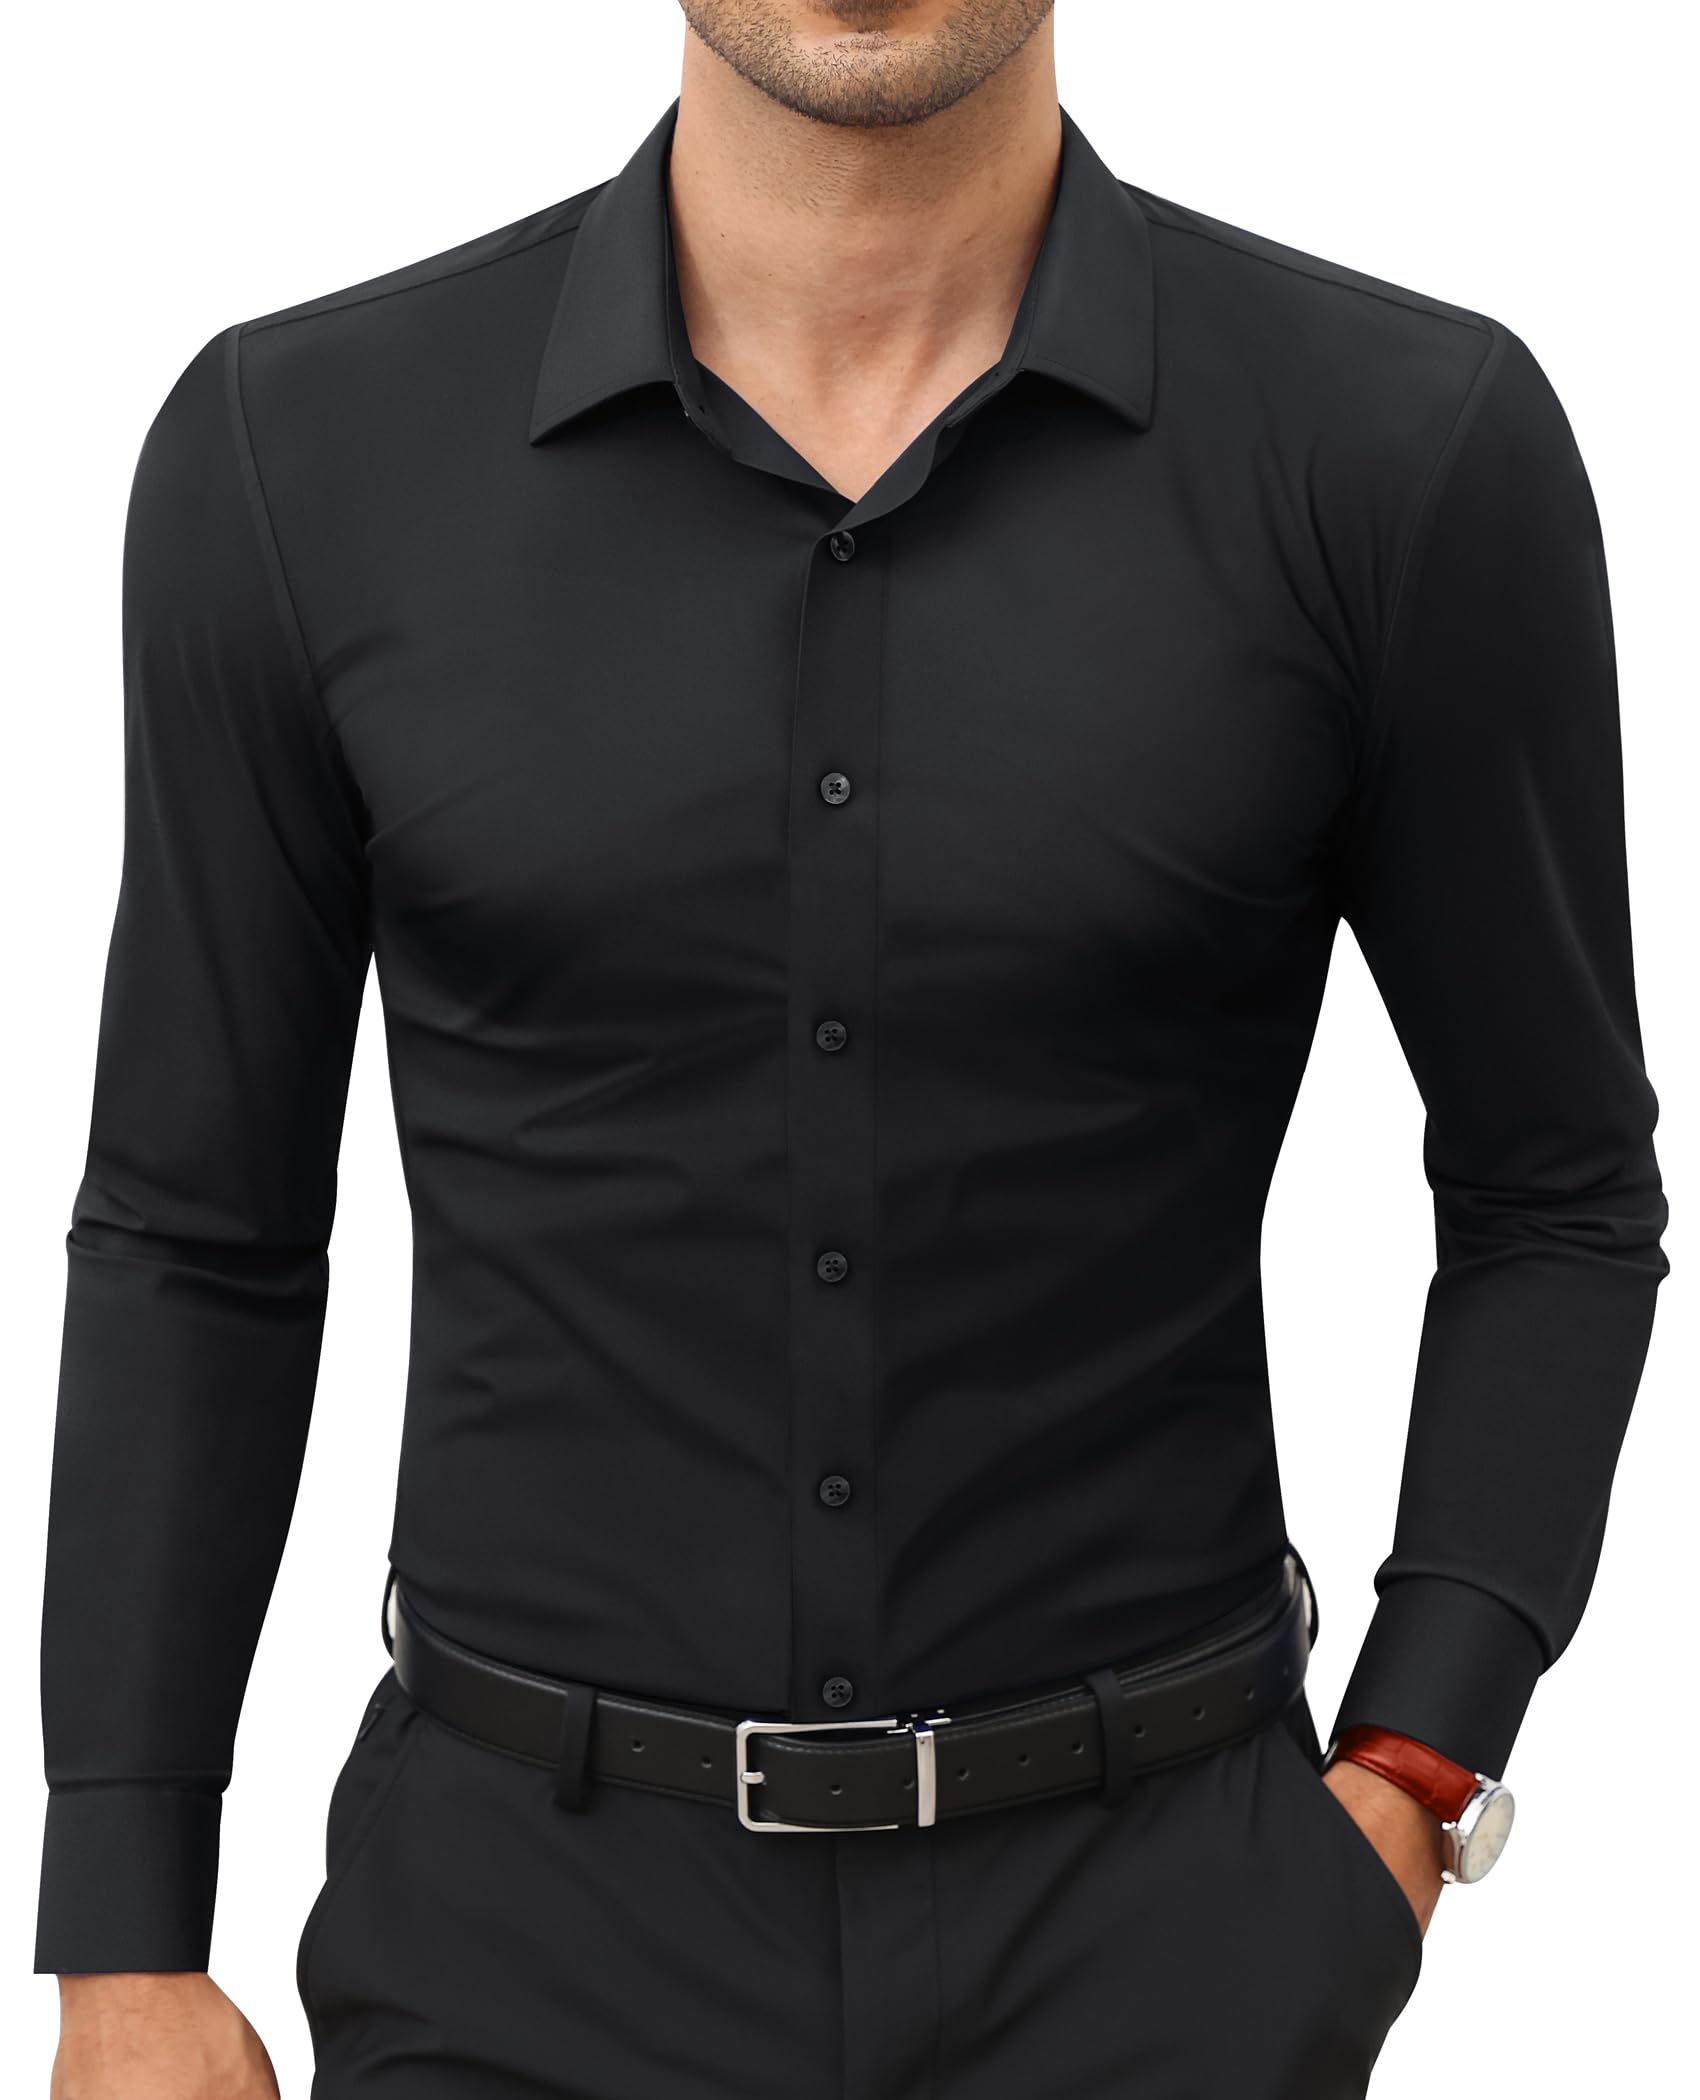 (Color black,size small) Lion Nardo Stretch Dress Shirts for Men Slim Fit Men's Dress Shirts Long Sleeve Muscle Fit Casual Button Down Shirts